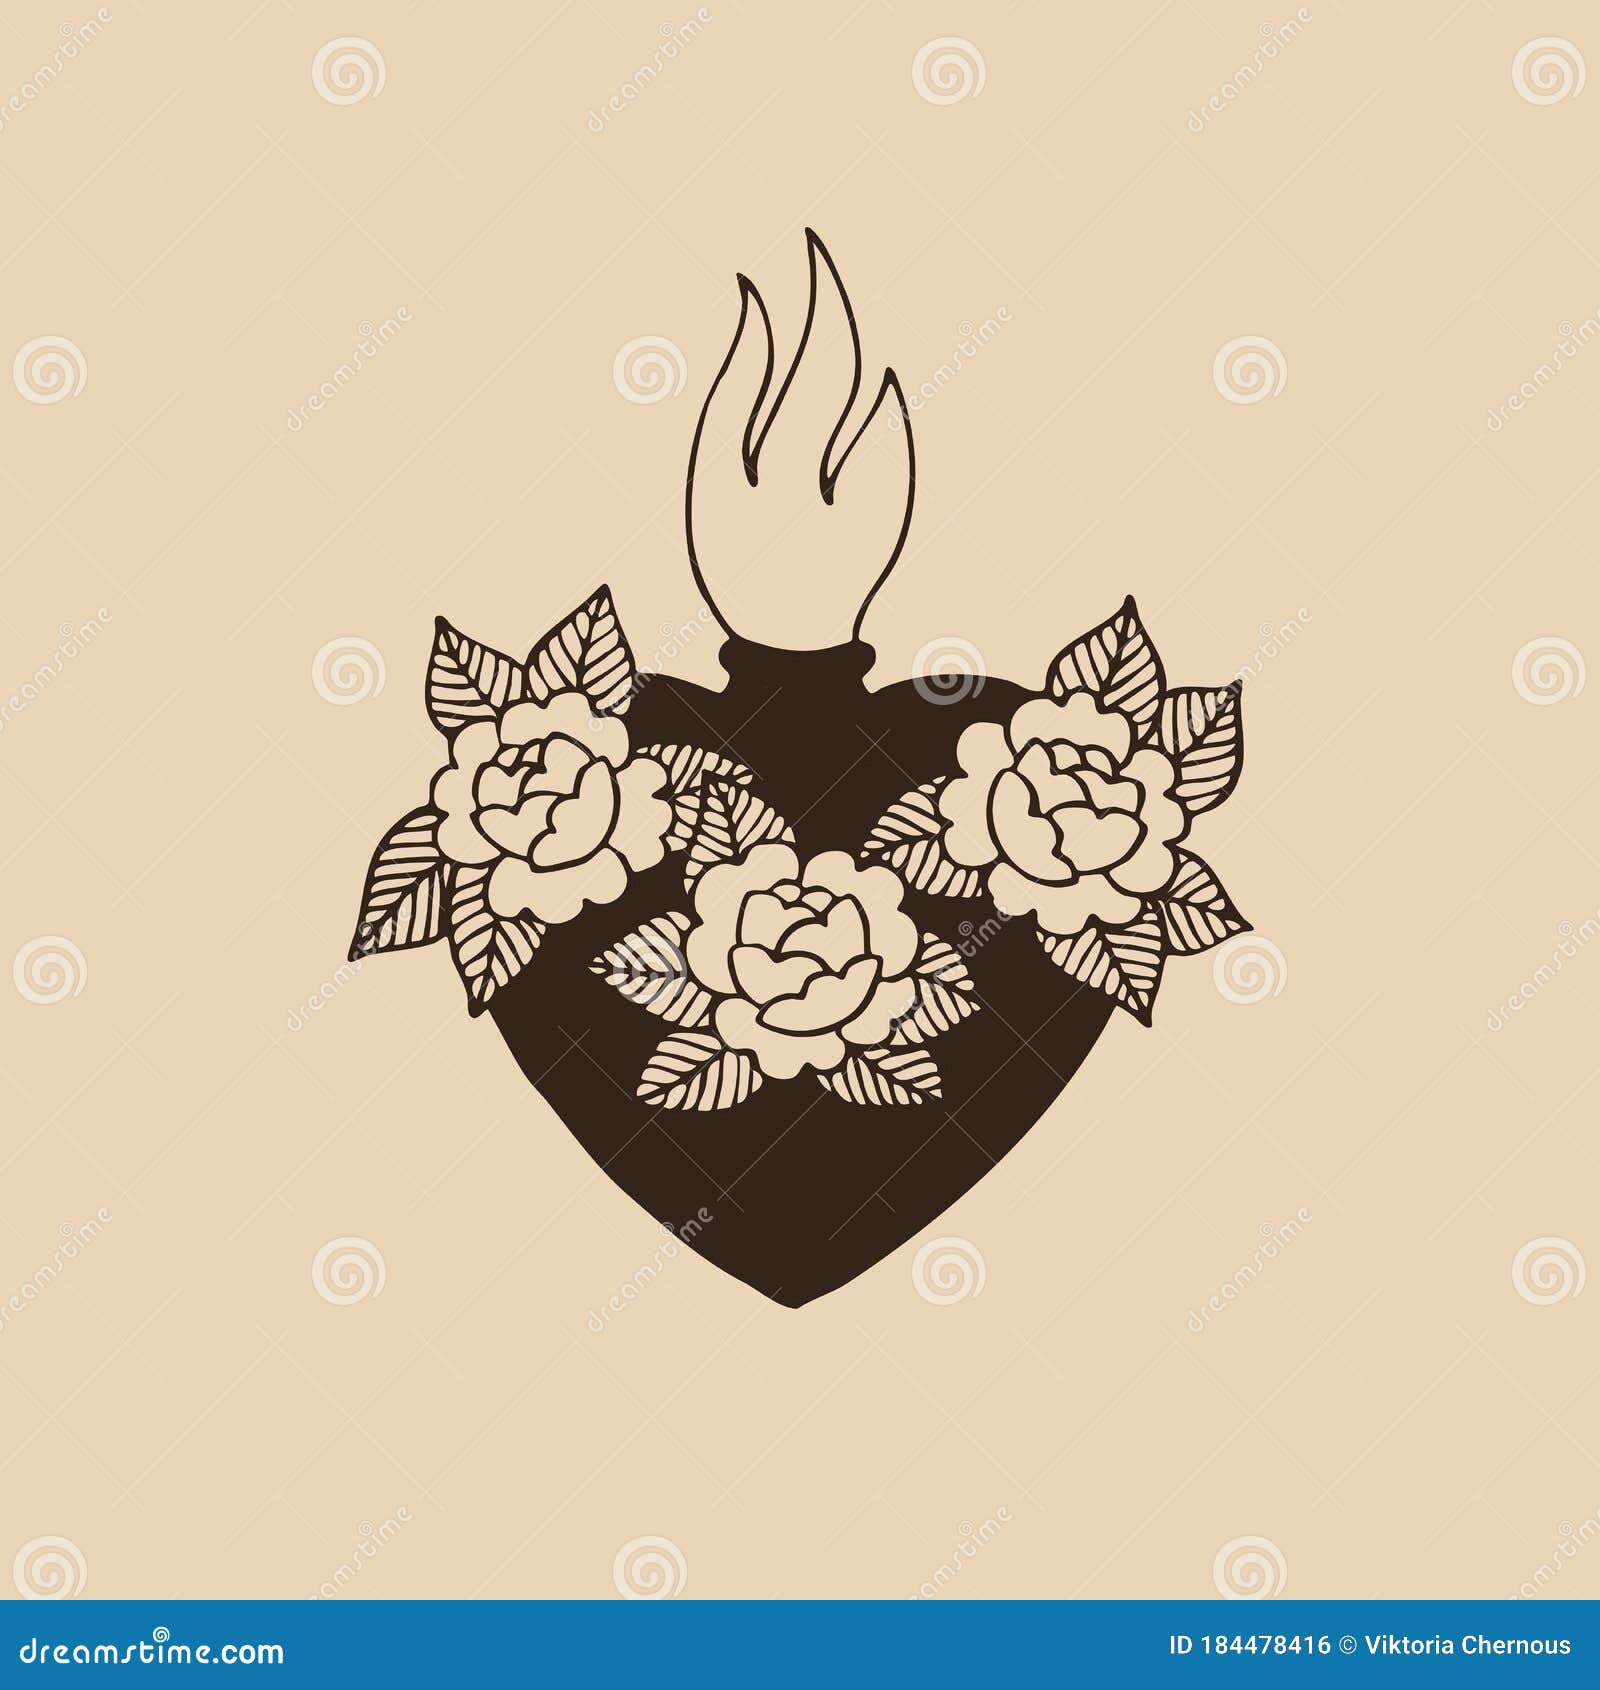 Sacred Heart Traditional Tattoo Flash Stock Vector Royalty Free 747873427   Shutterstock